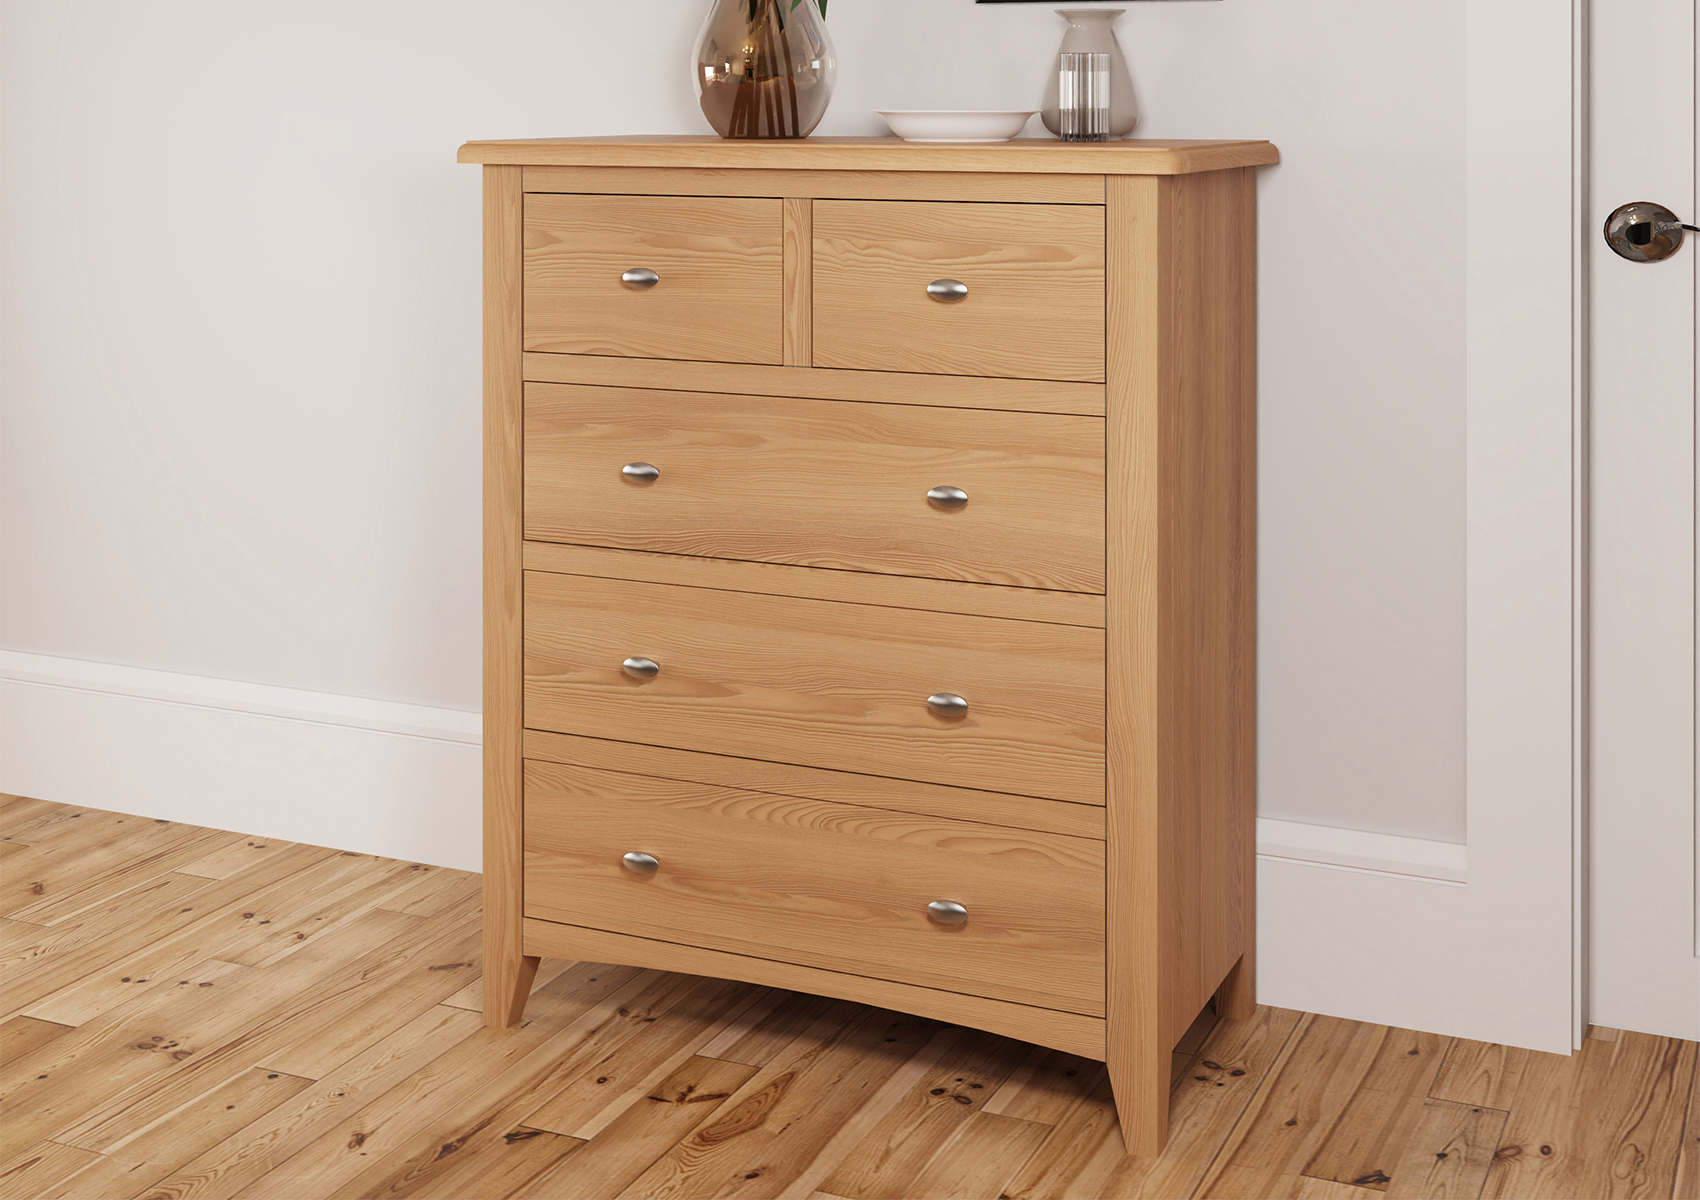 View Gainsborough Light Oak 3 2 Chest of Drawers Time4Sleep information